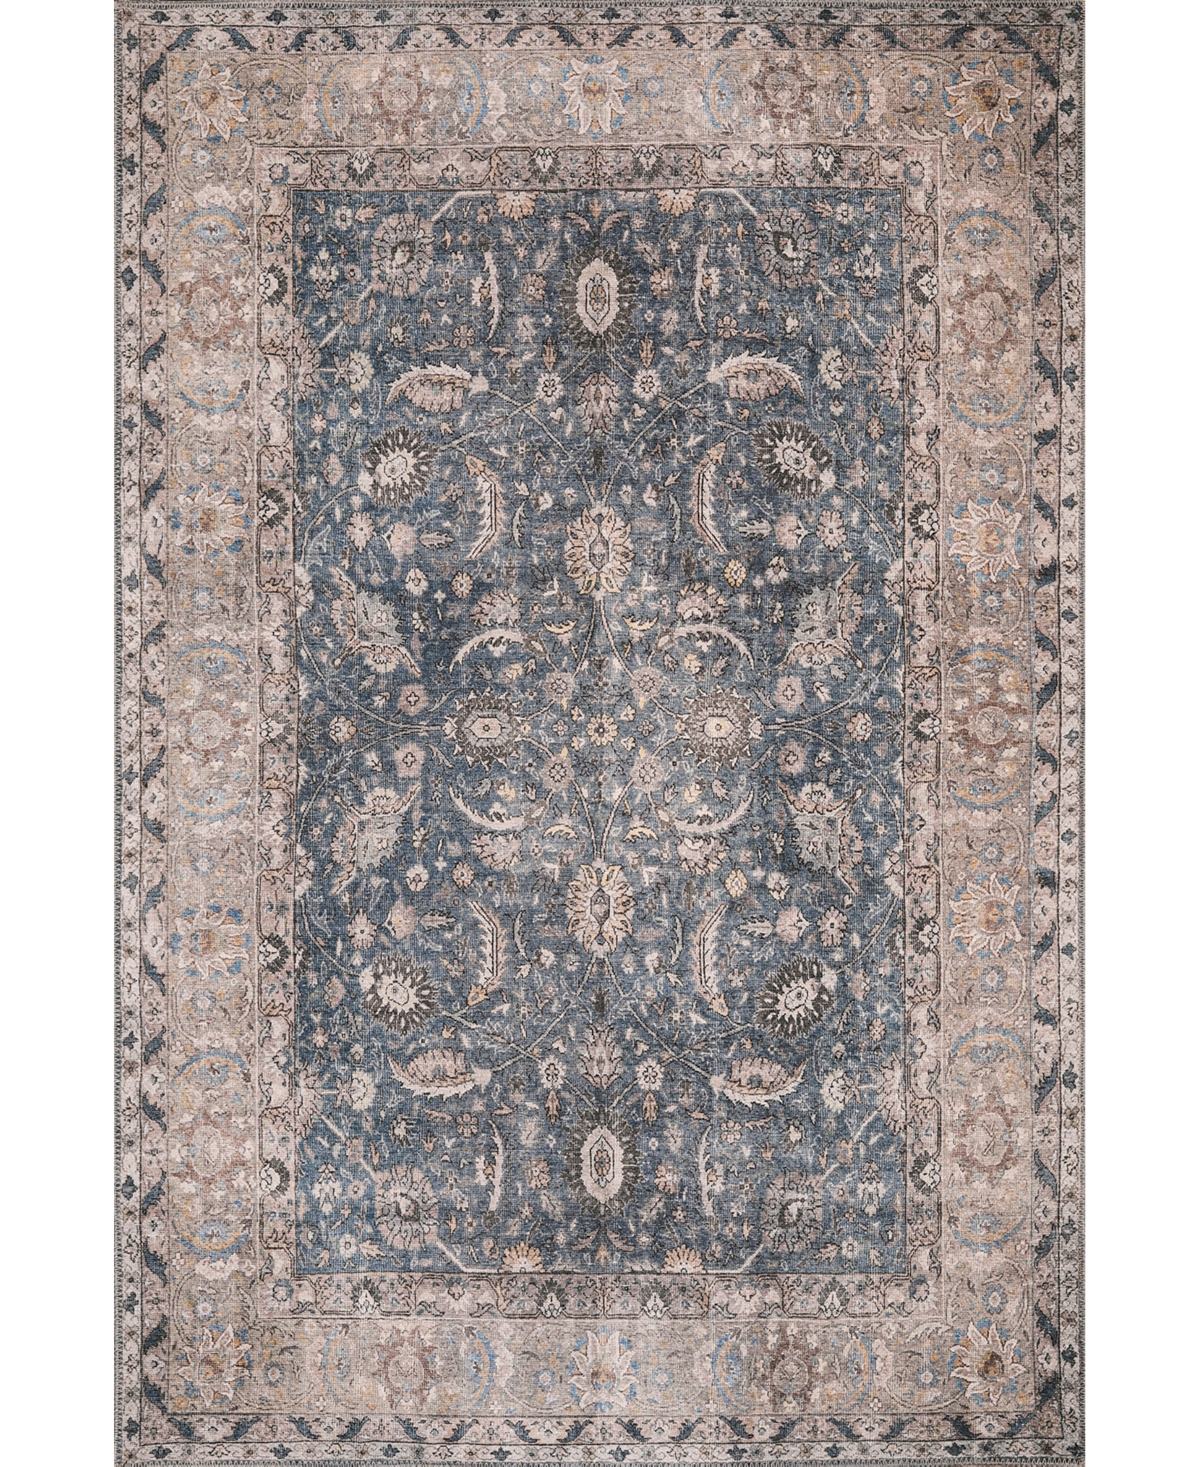 Kas London Machine Washable 4802 3'9" X 5'6" Area Rug In Blue